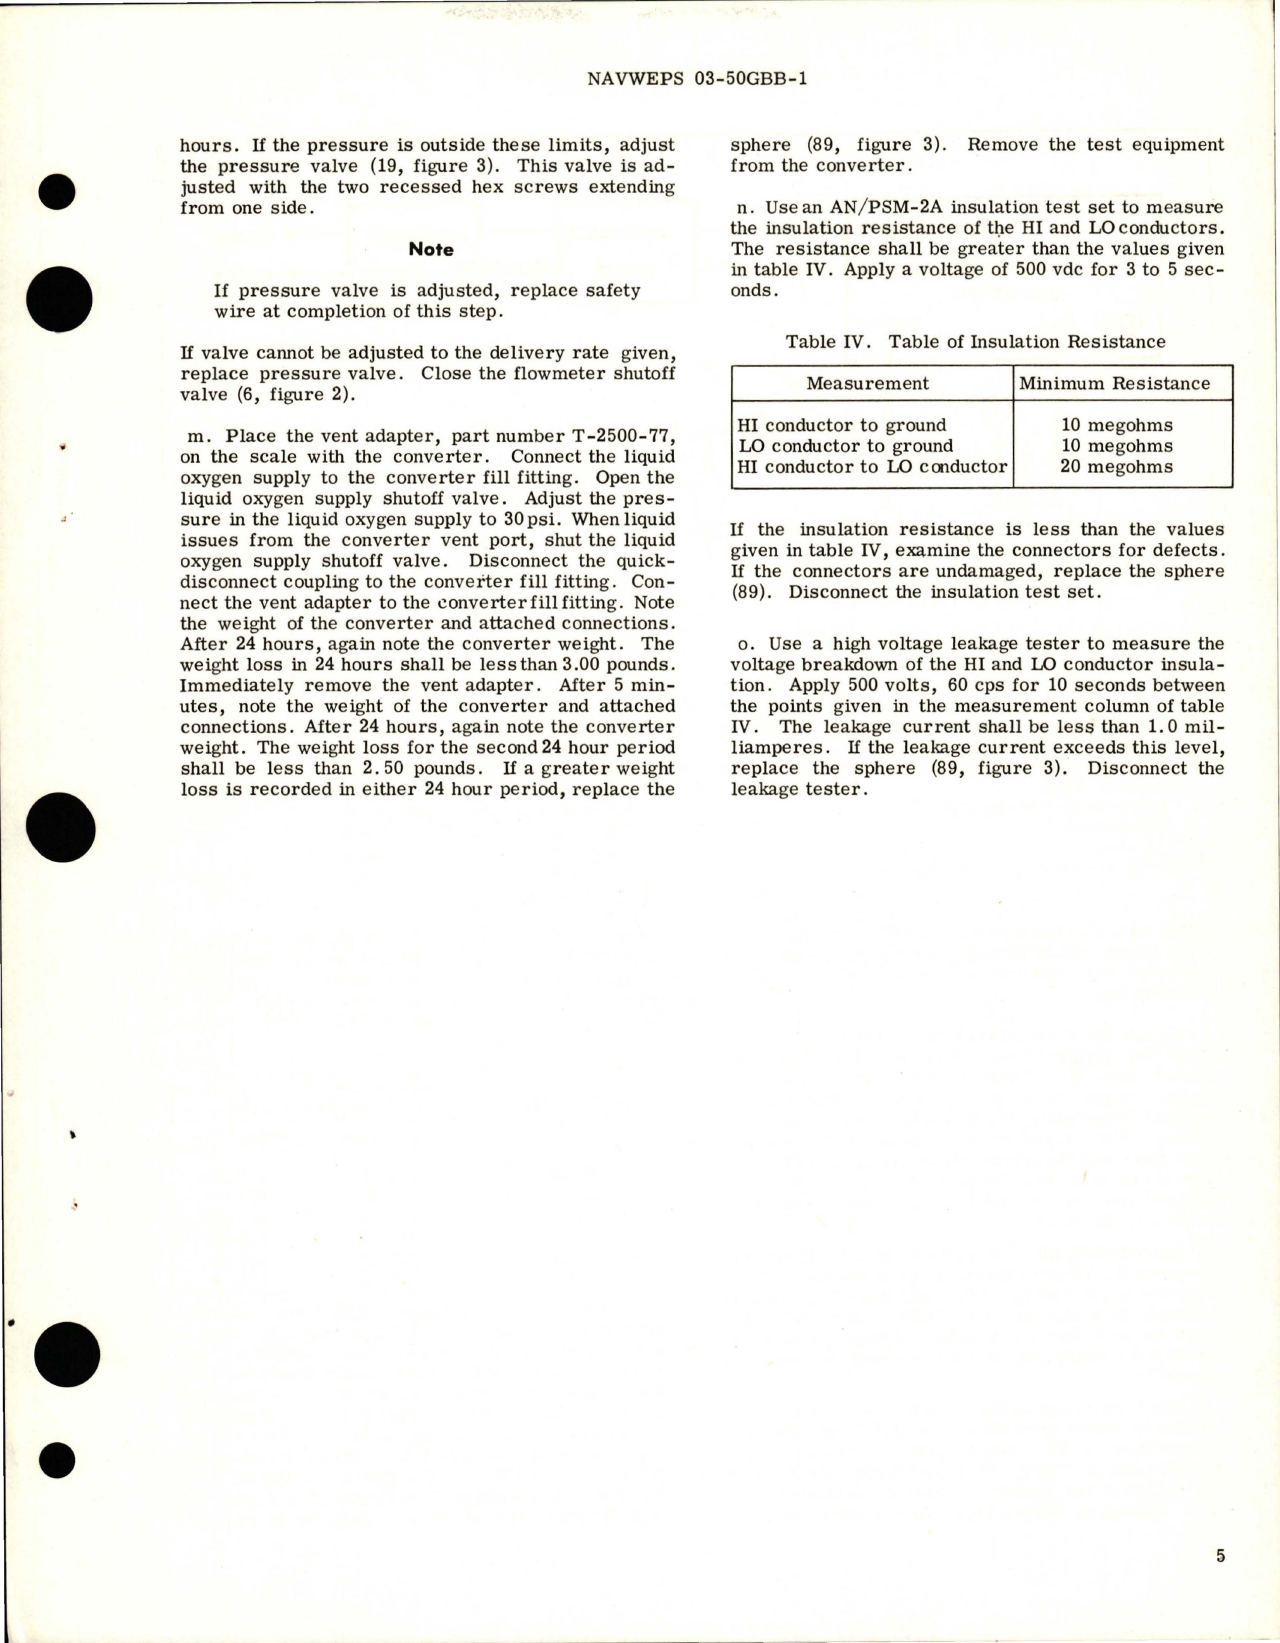 Sample page 7 from AirCorps Library document: Overhaul Instructions for Empennage De-Icer Control - Part 1035040-1